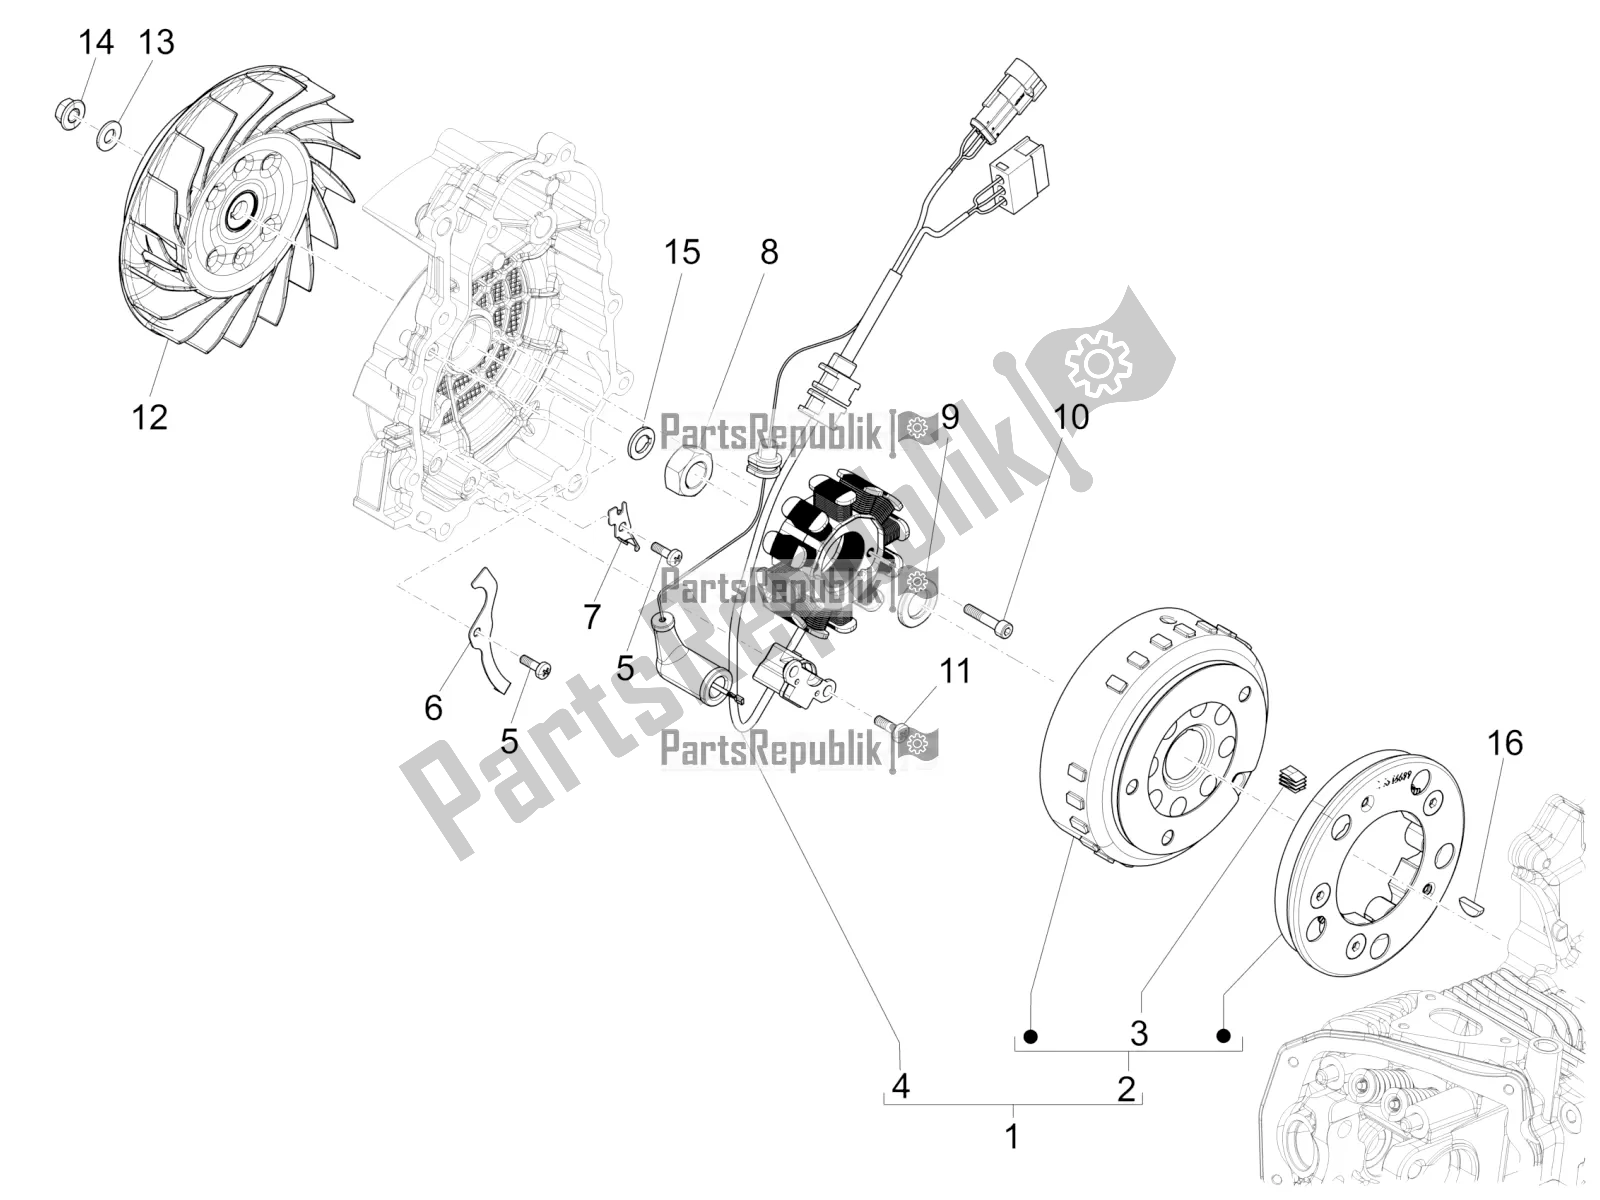 All parts for the Flywheel Magneto of the Vespa Primavera 150 Iget Apac 2020